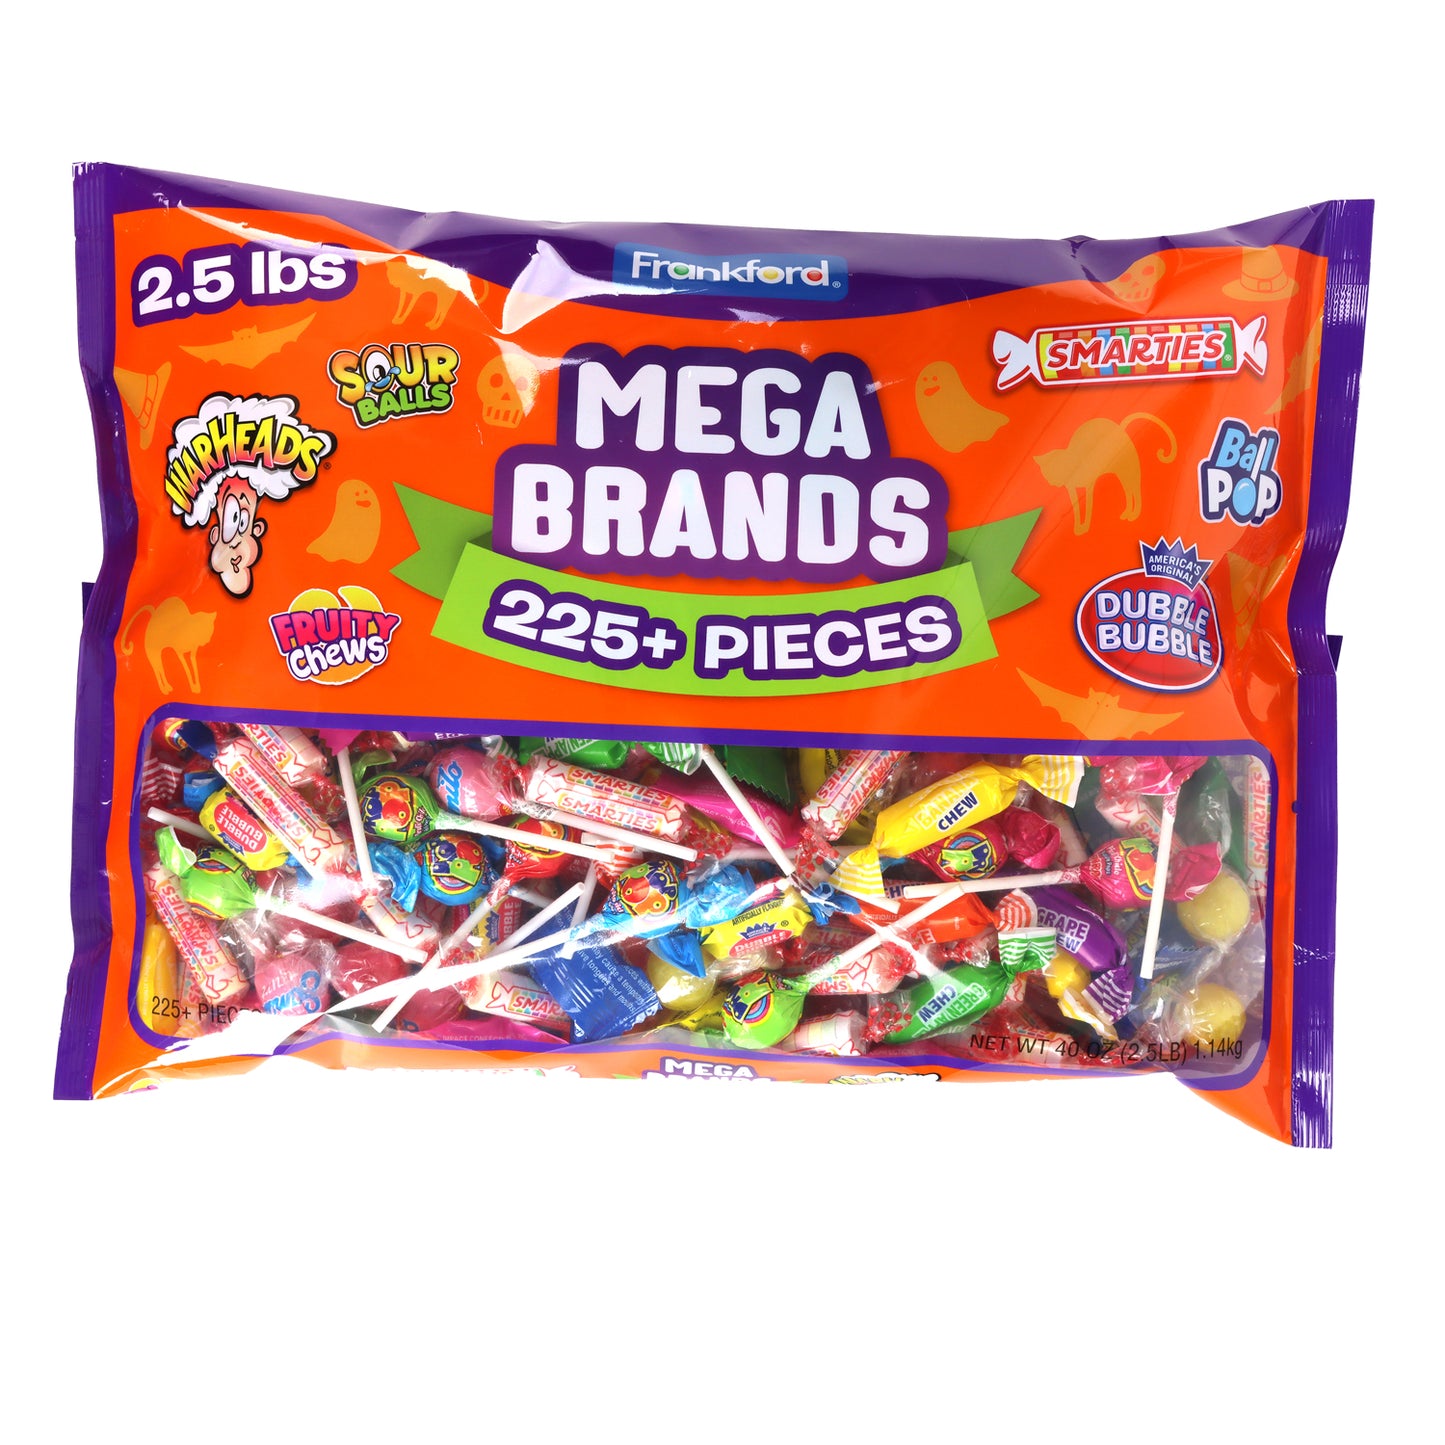 orange bag with over 225 pieces of individually wrapped candies and gum